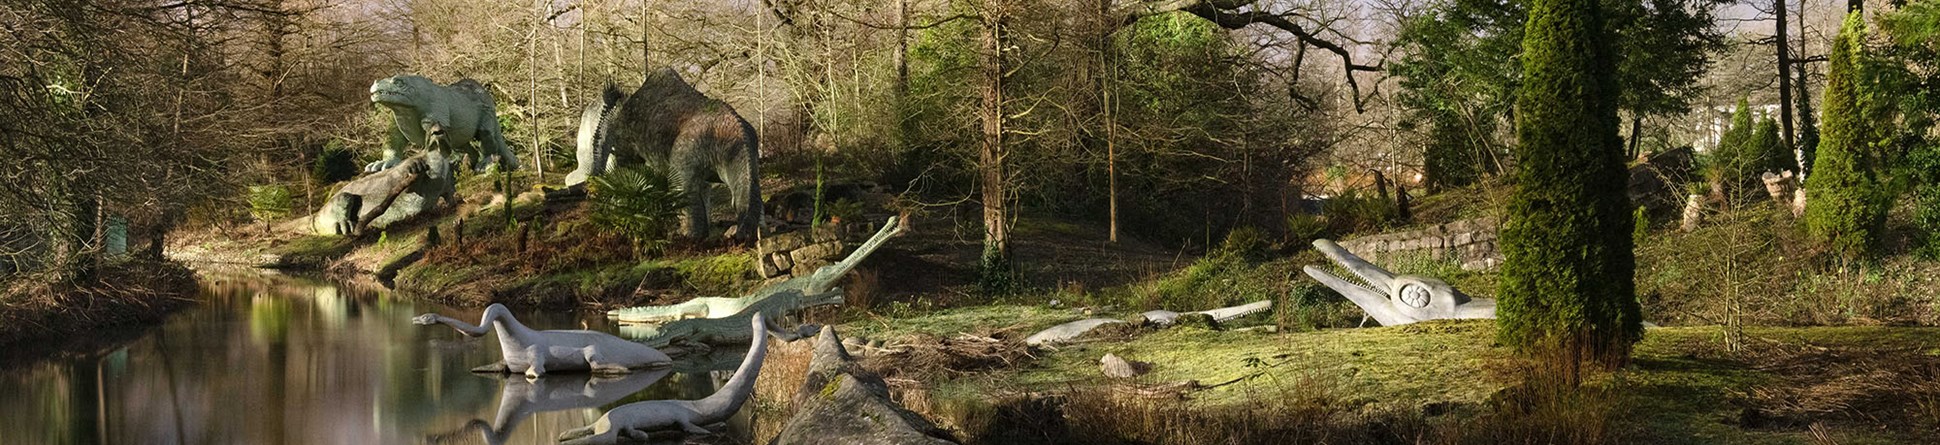 General view of dinosaurs along the lakeside